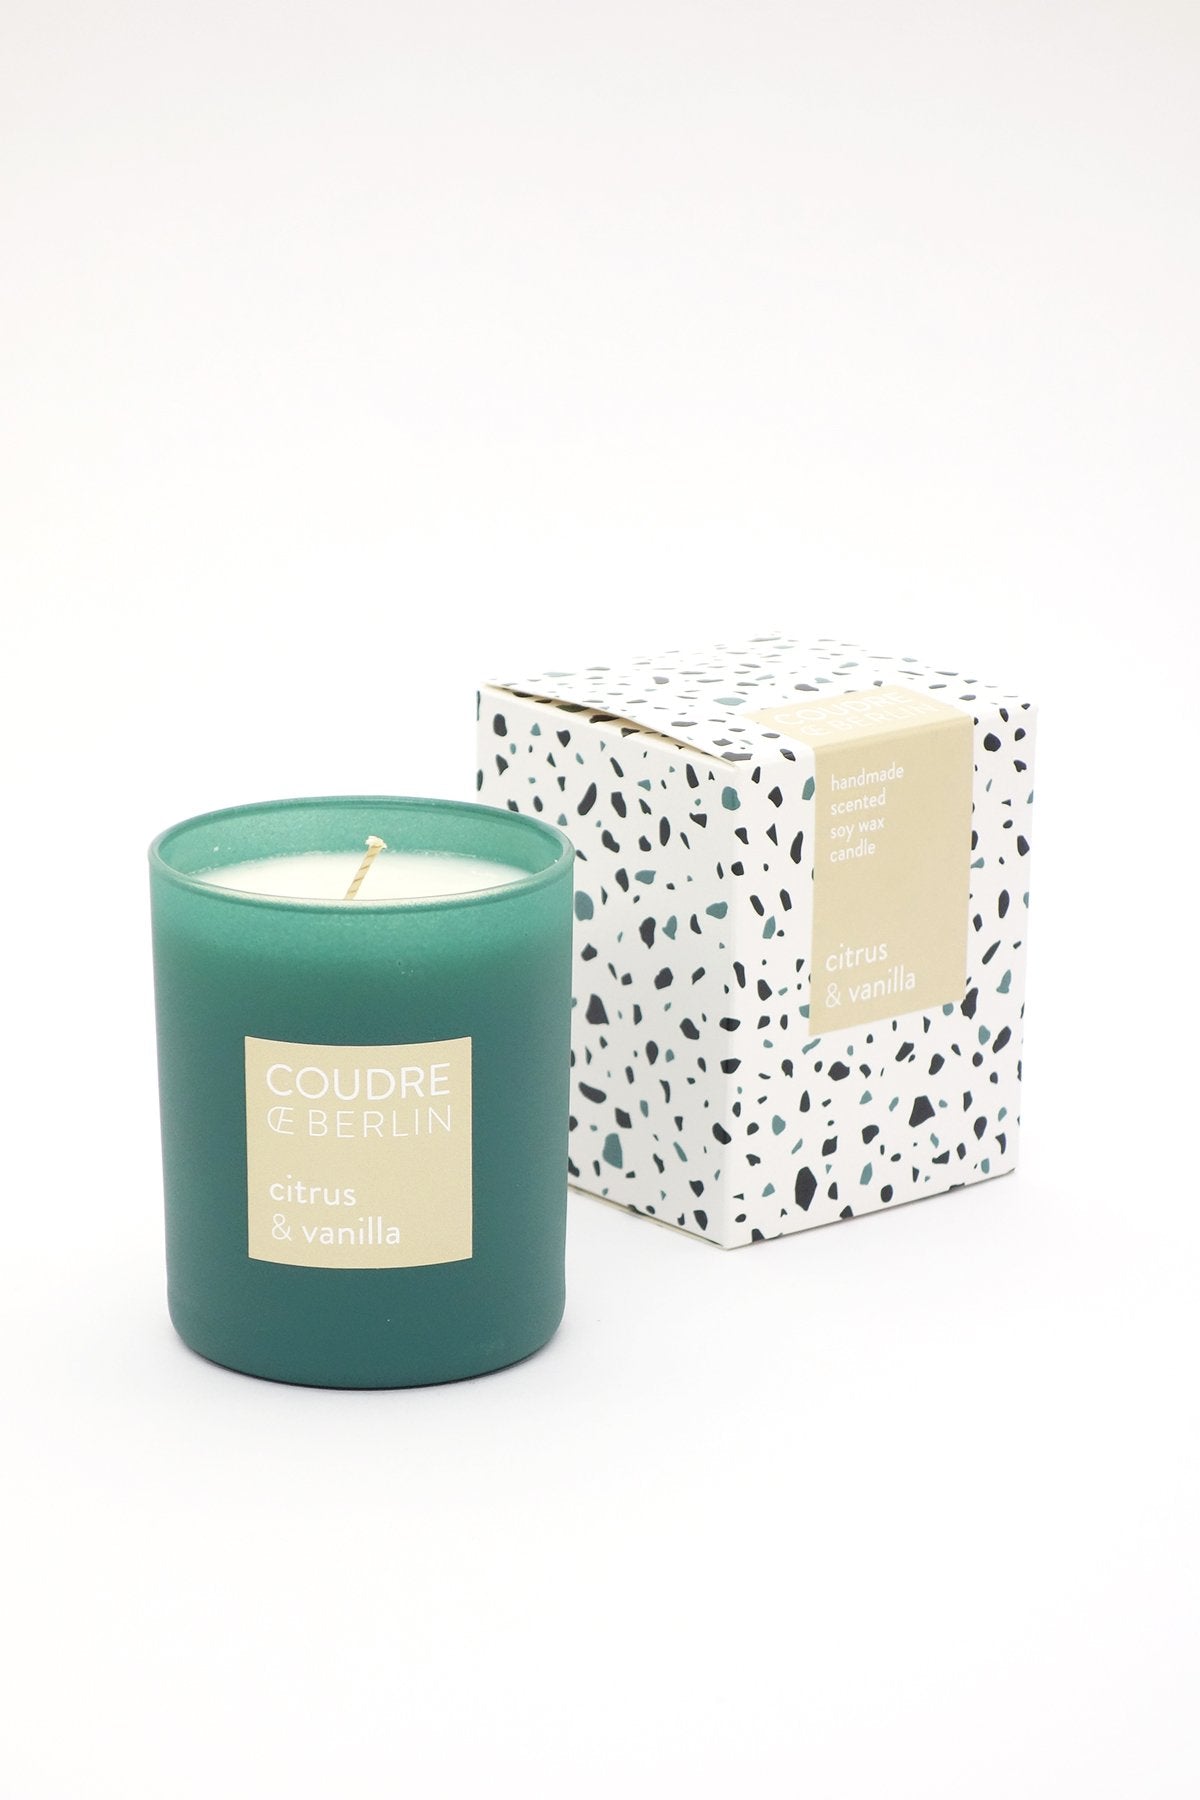  Coudre Berlin  Citrus and Vanilla Continuous Scented Candle